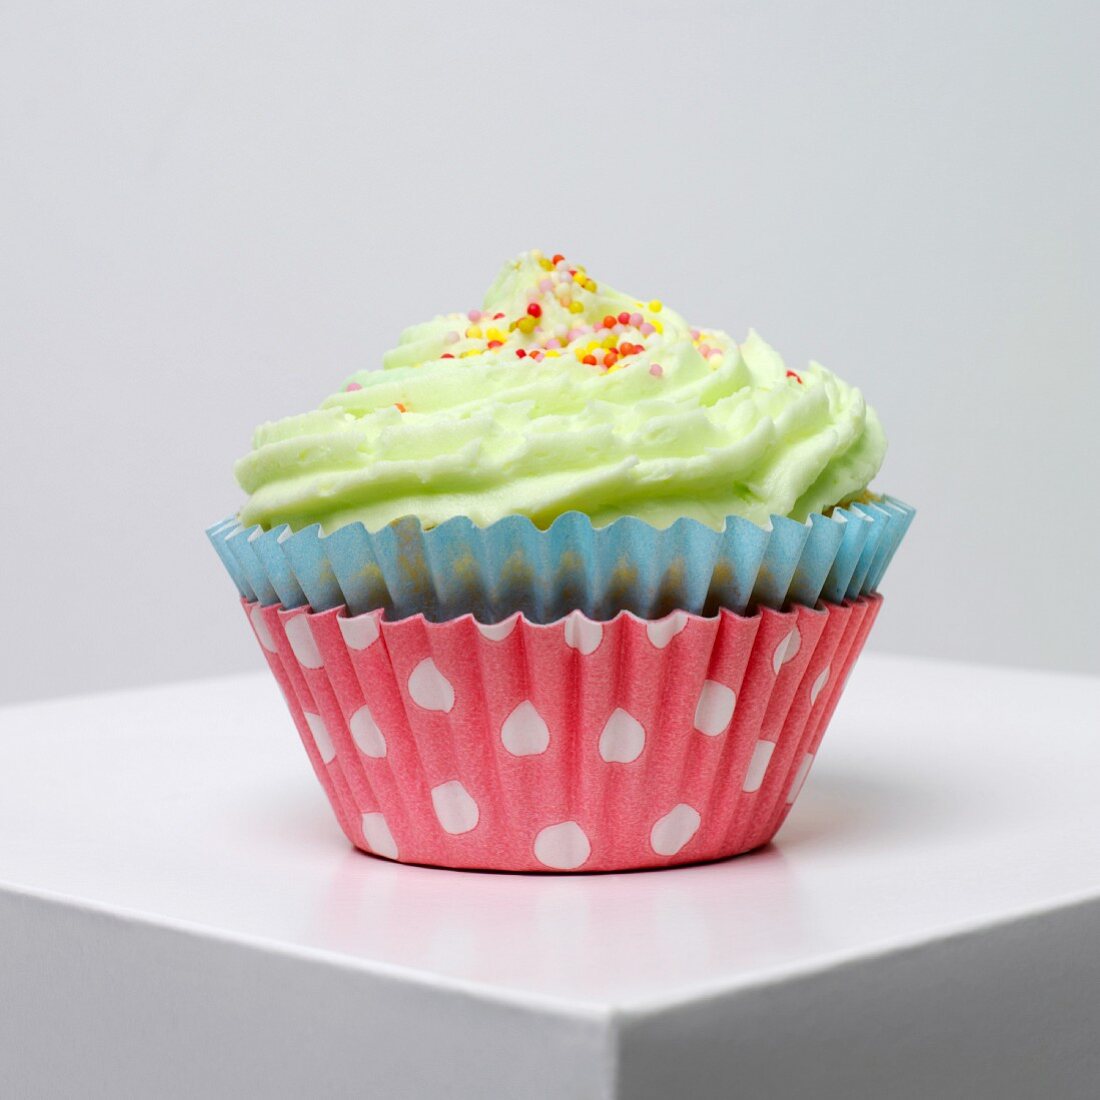 A cupcake with pistachio icing and colourful sugar balls